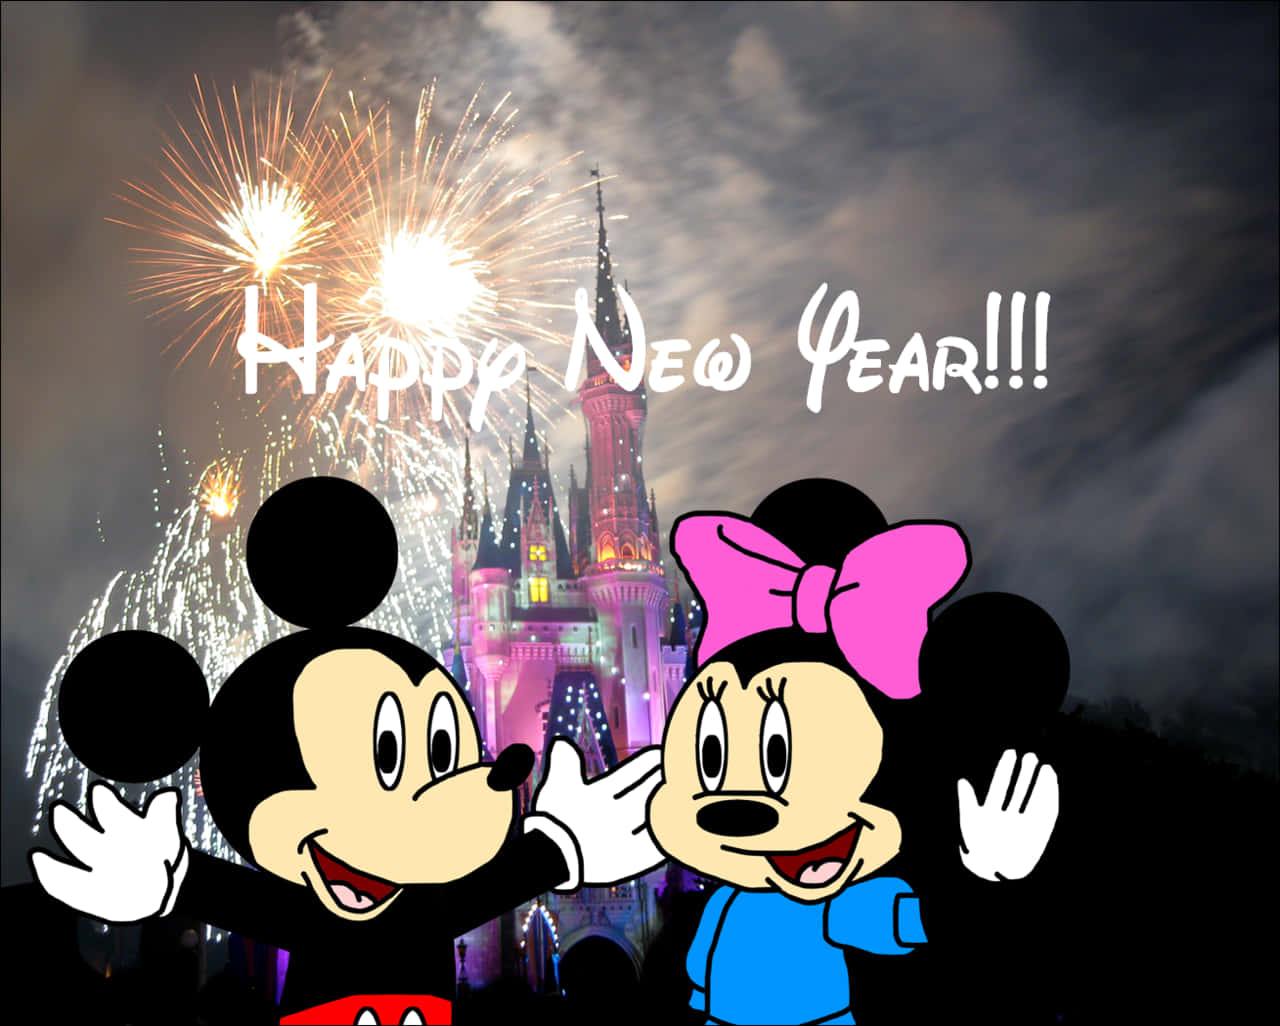 "Bringing in the New Year the Mickey Mouse way!" Wallpaper